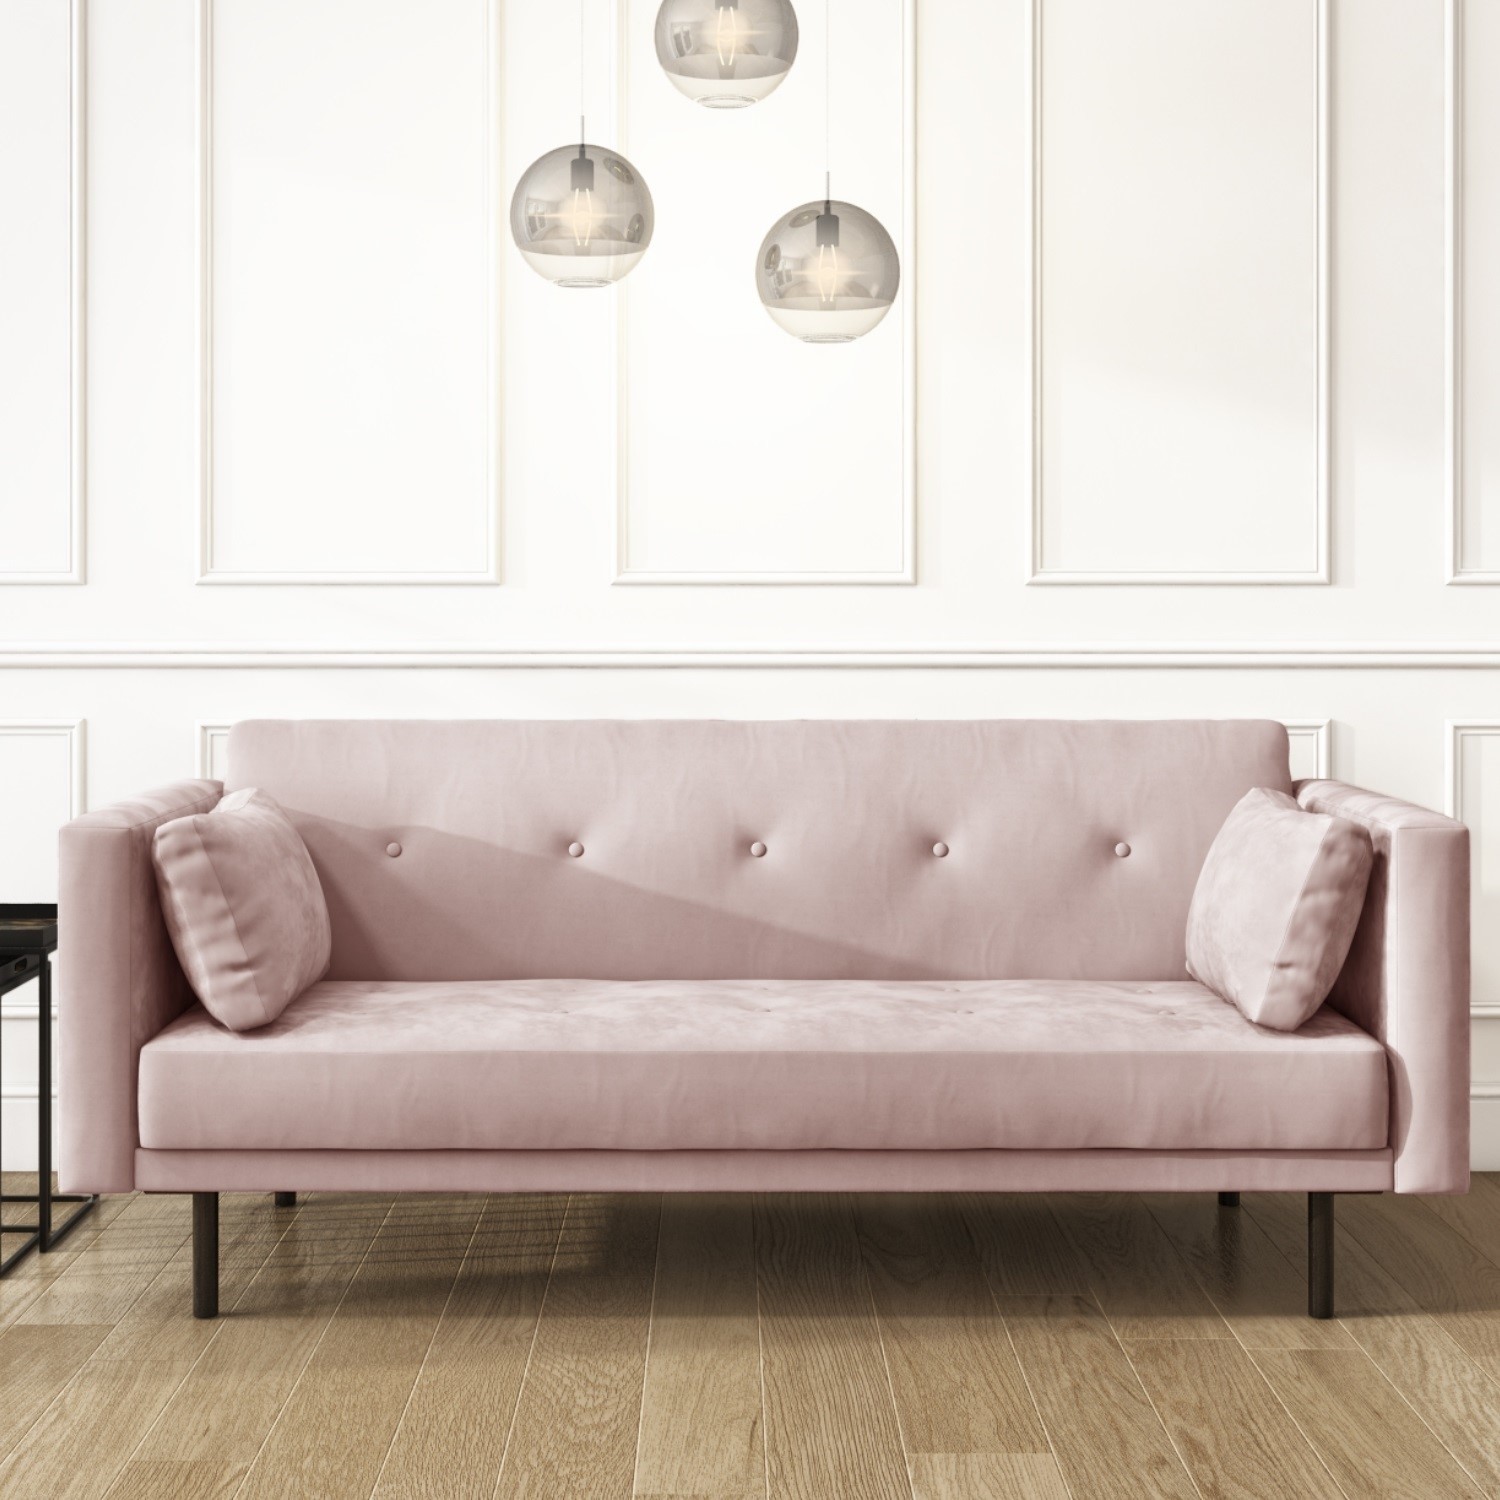 Velvet Sofa Bed In Baby Pink With, Soft Pink Sofa Bed